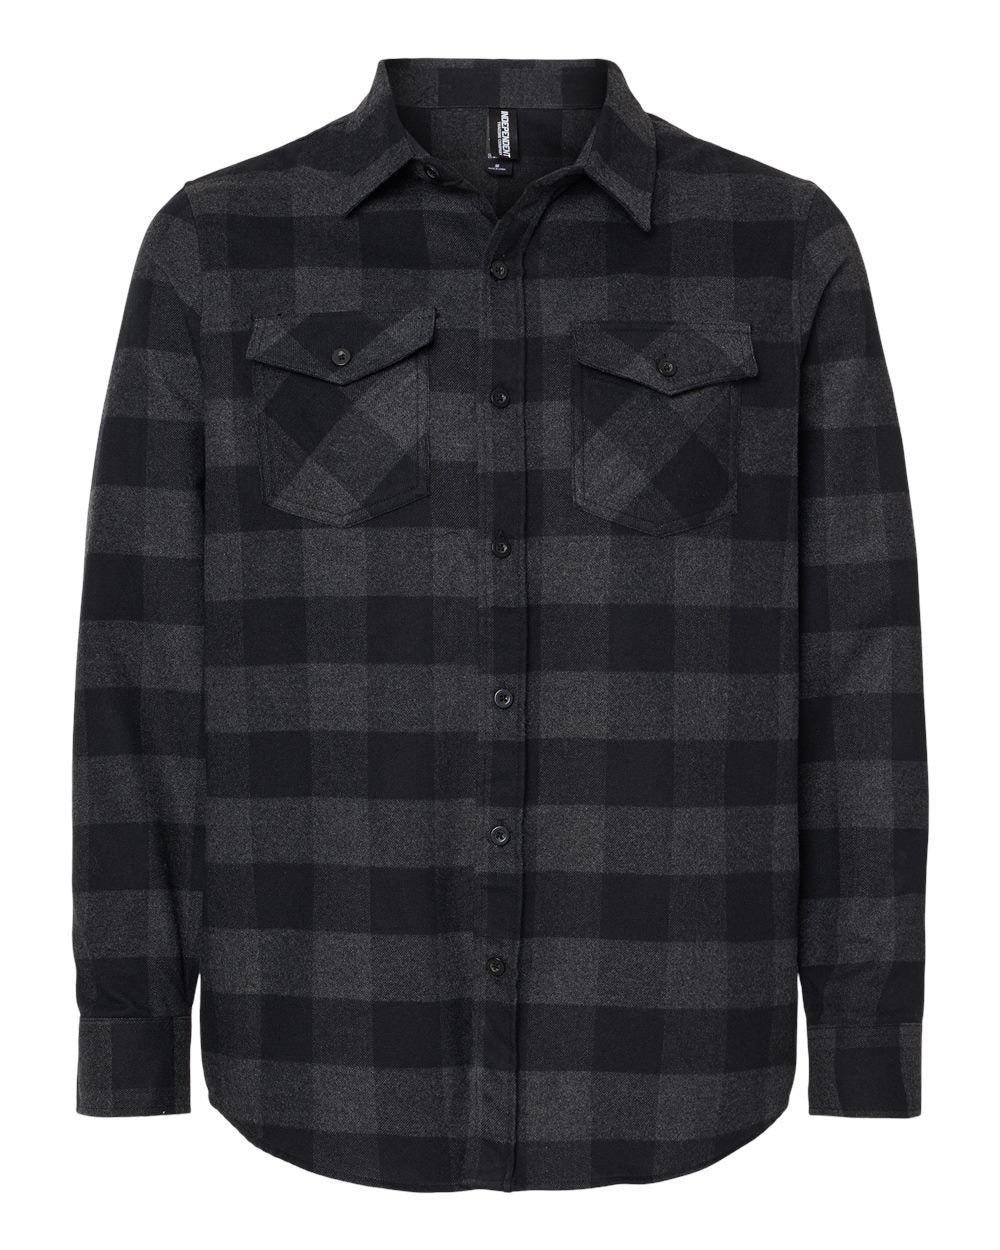 independent trading co flannel shirt charcoal heather black